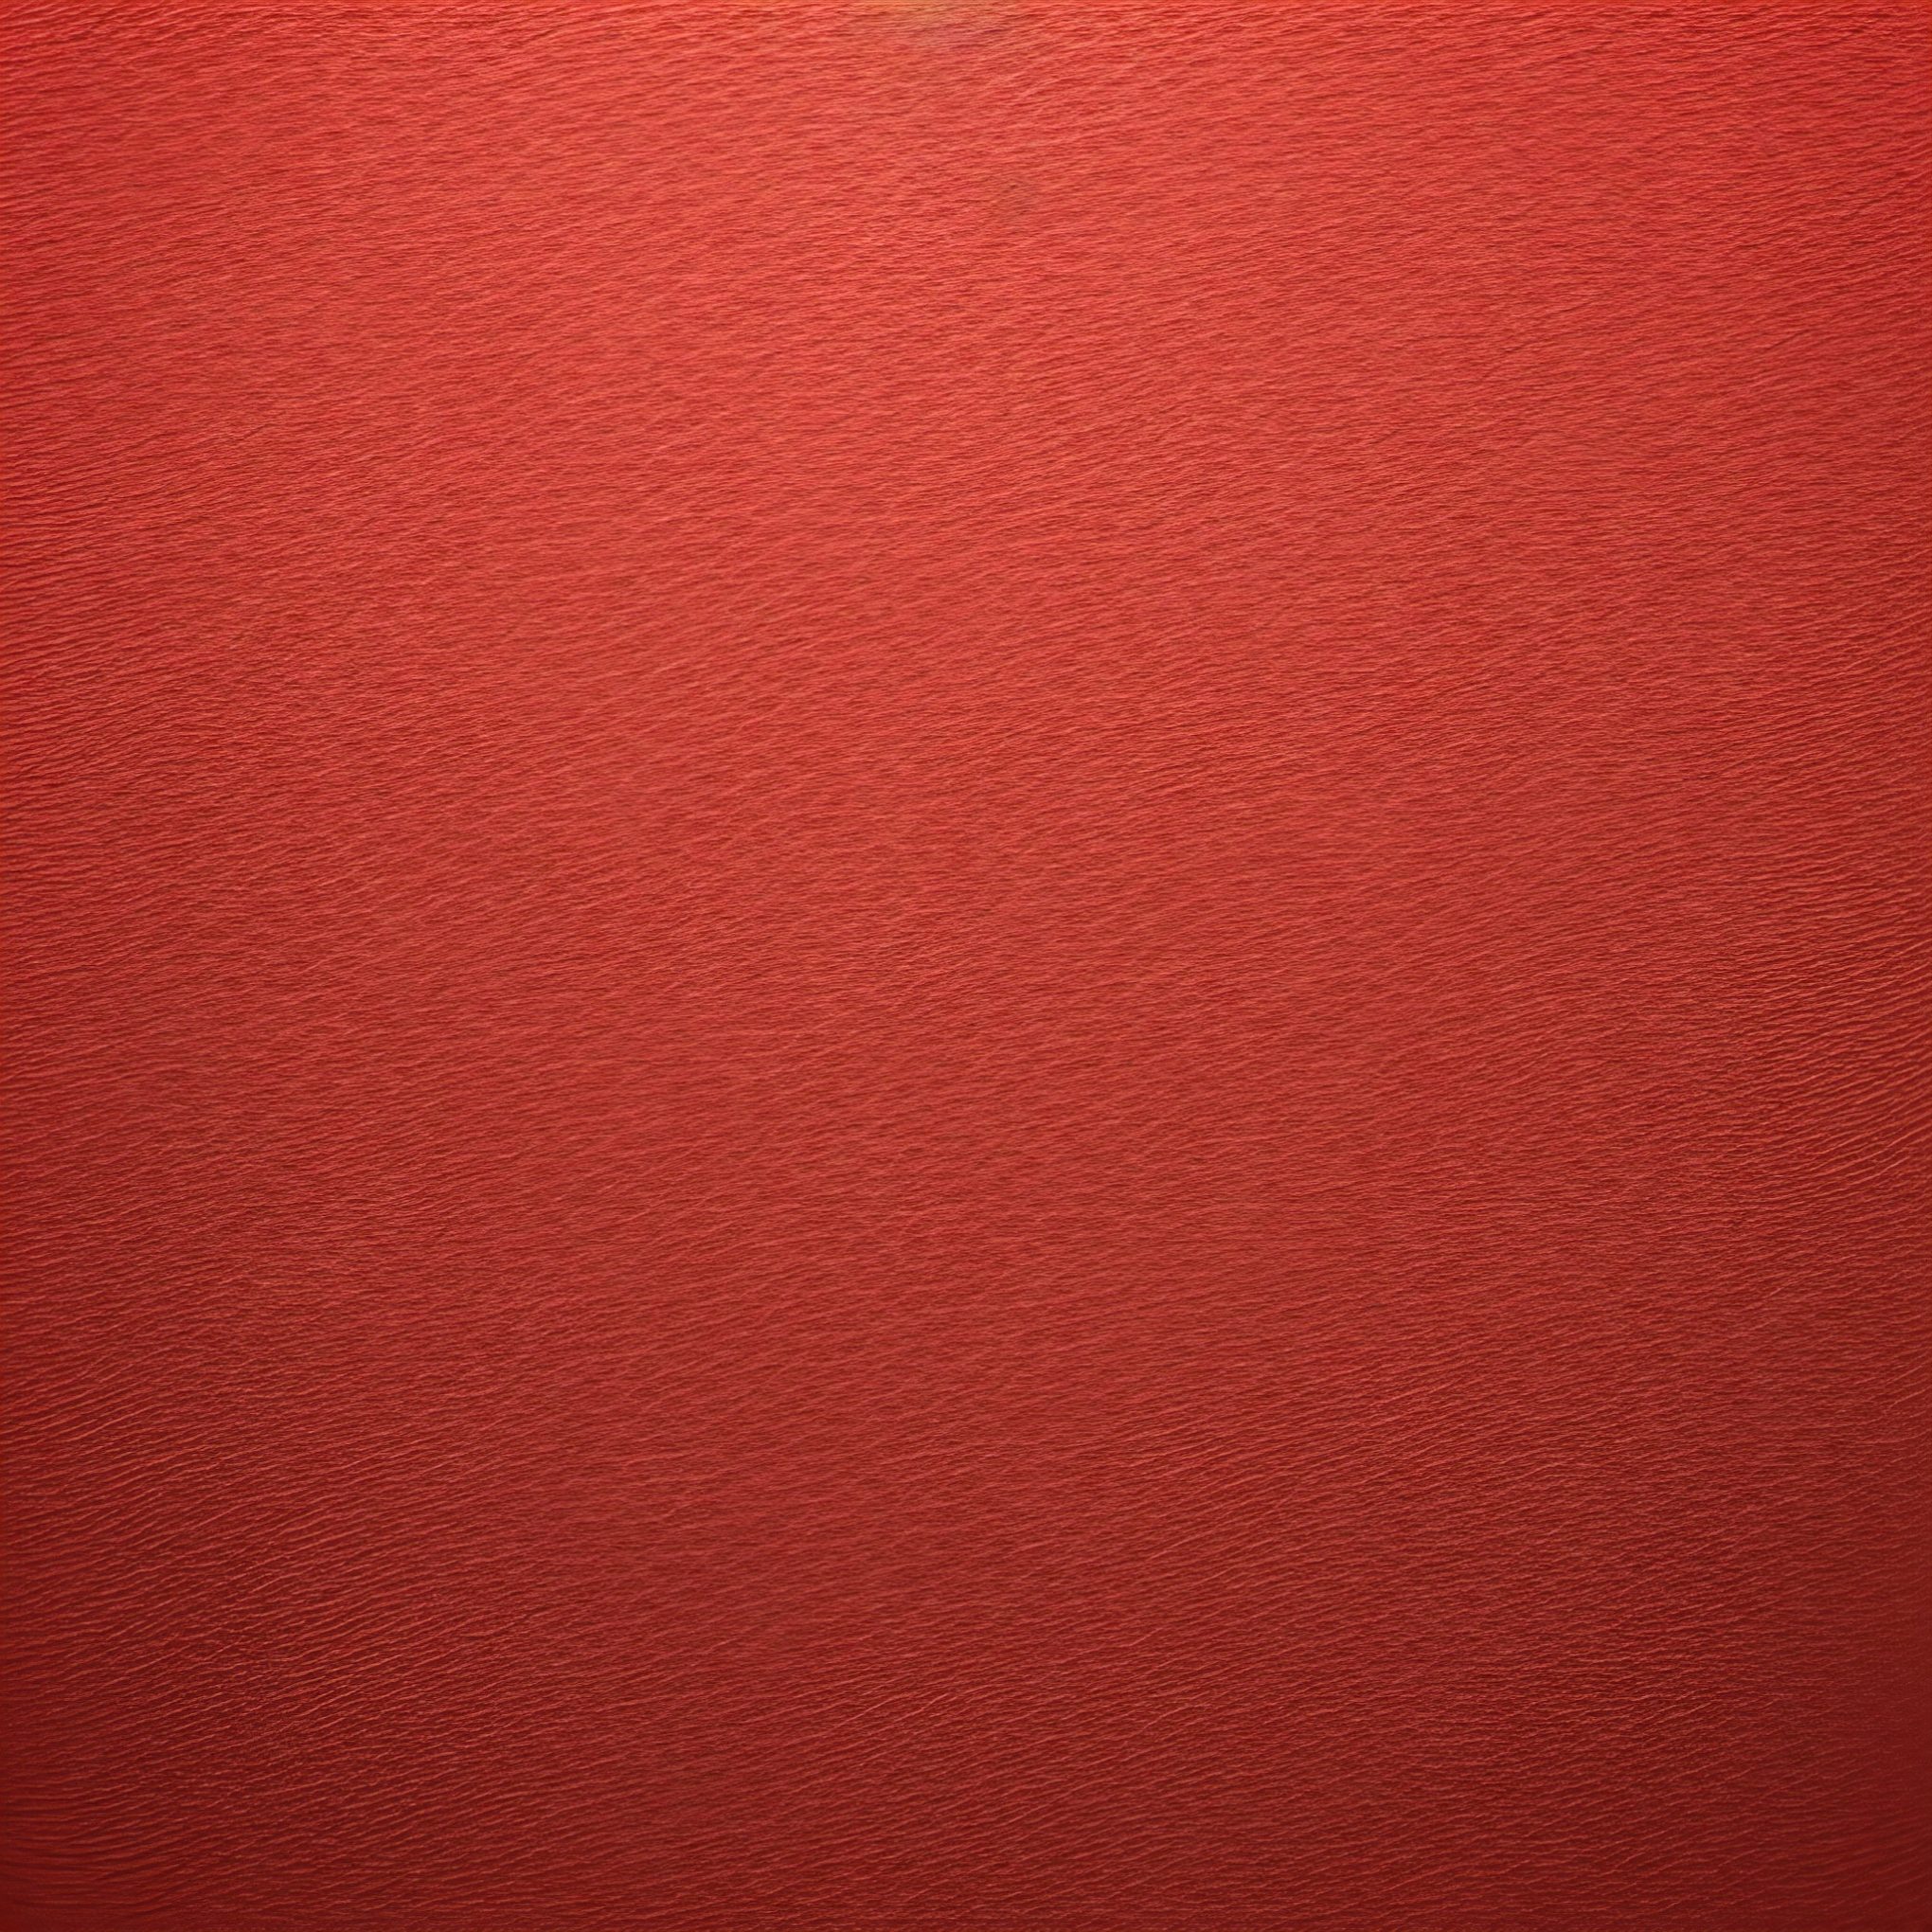 Red Leather Texture Background Free Stock Image